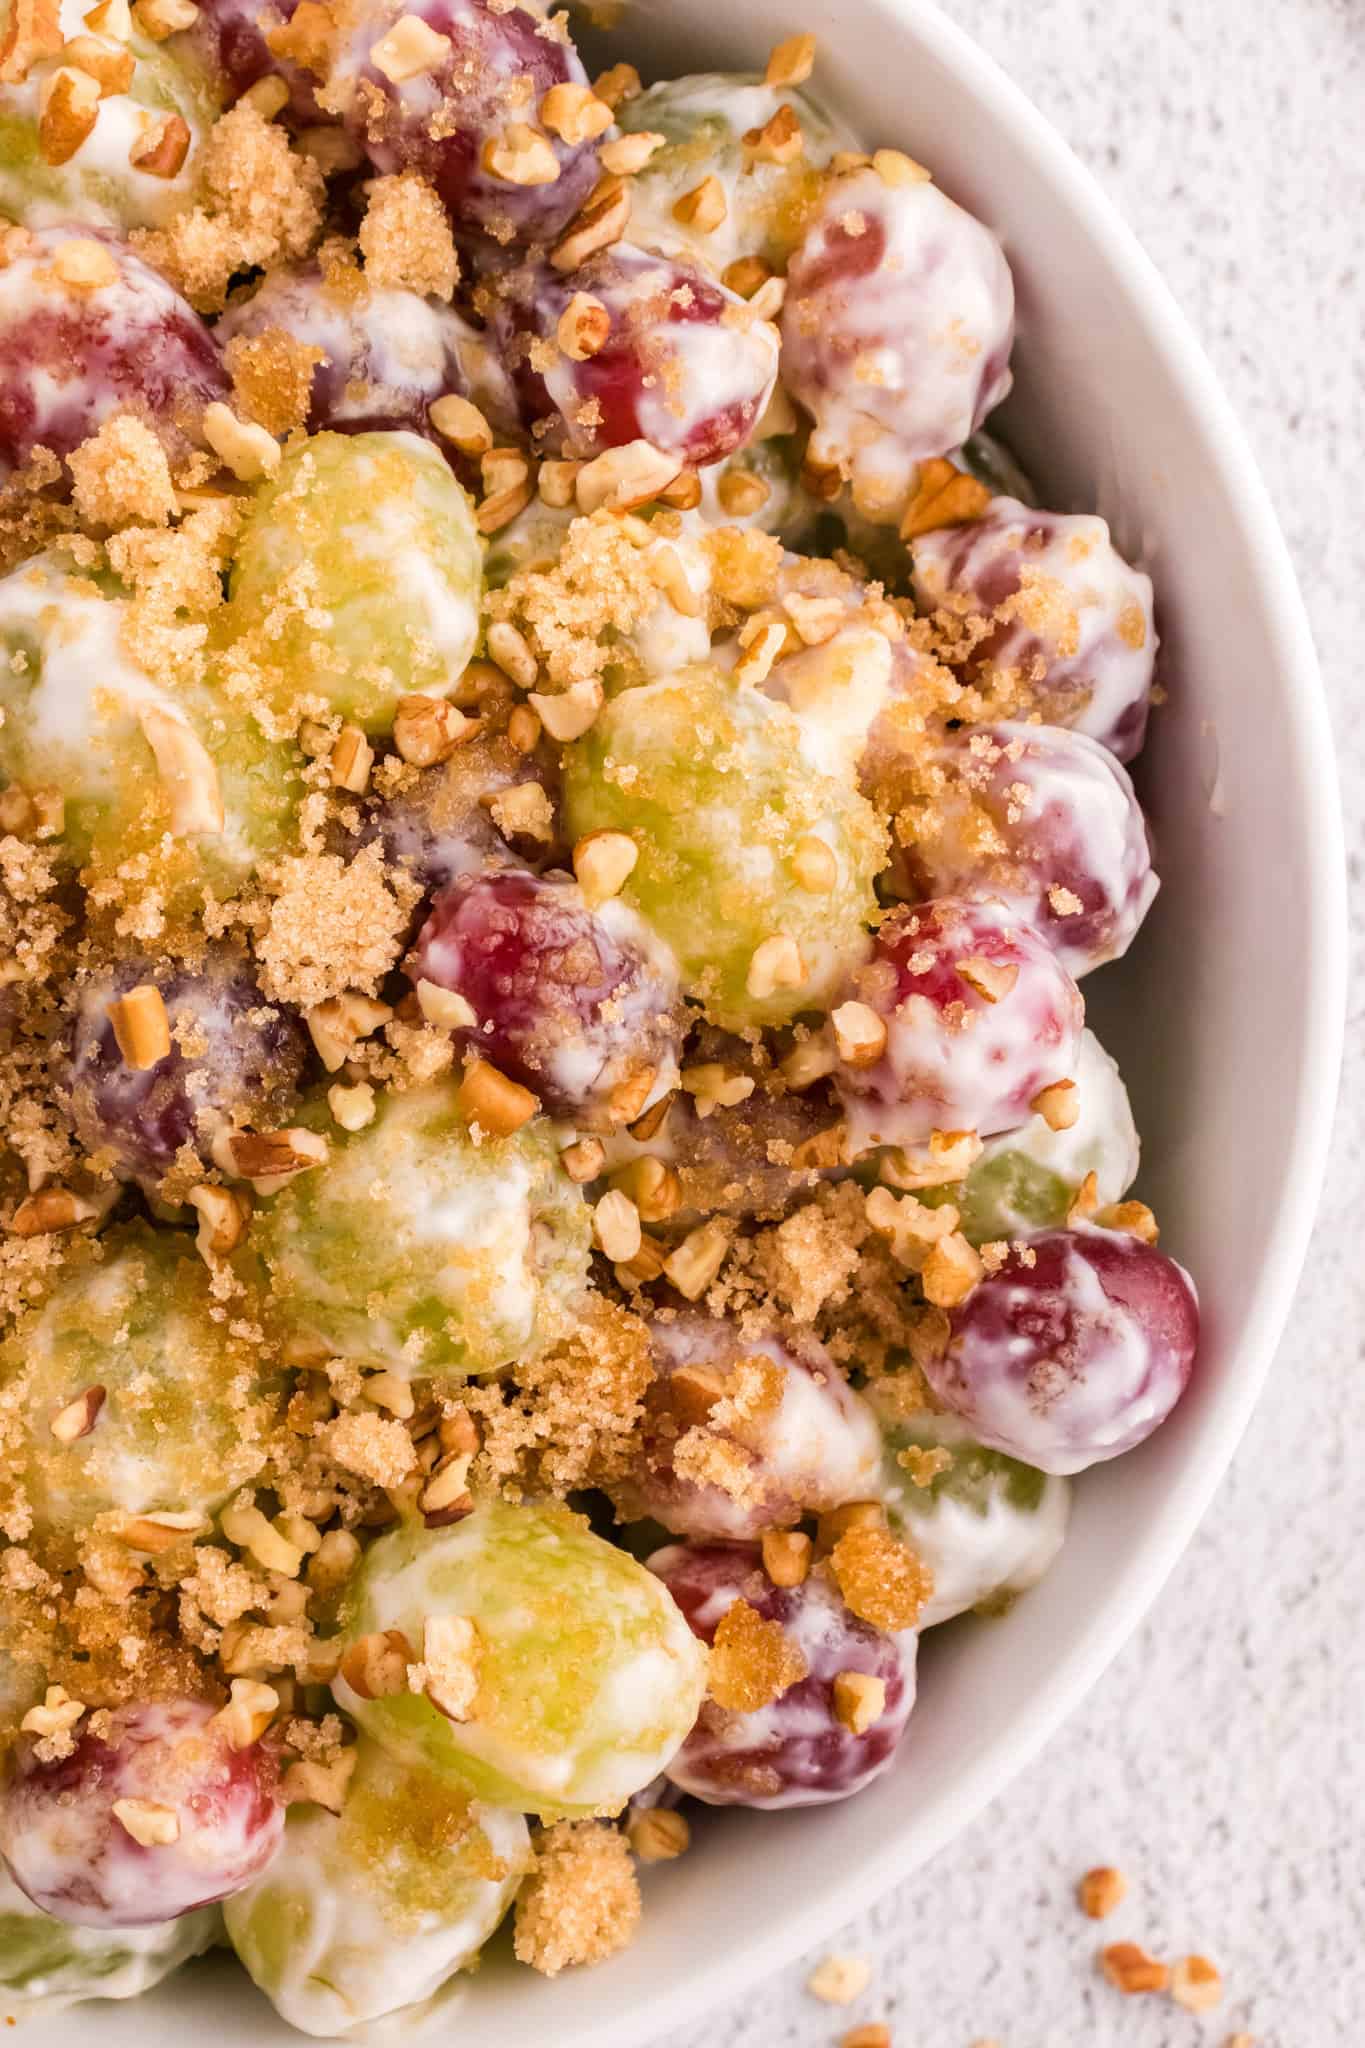 Grape Salad is a tasty side dish loaded with red and green grapes all tossed in a cream cheese and yogurt mixture and topped with brown sugar and chopped pecans.